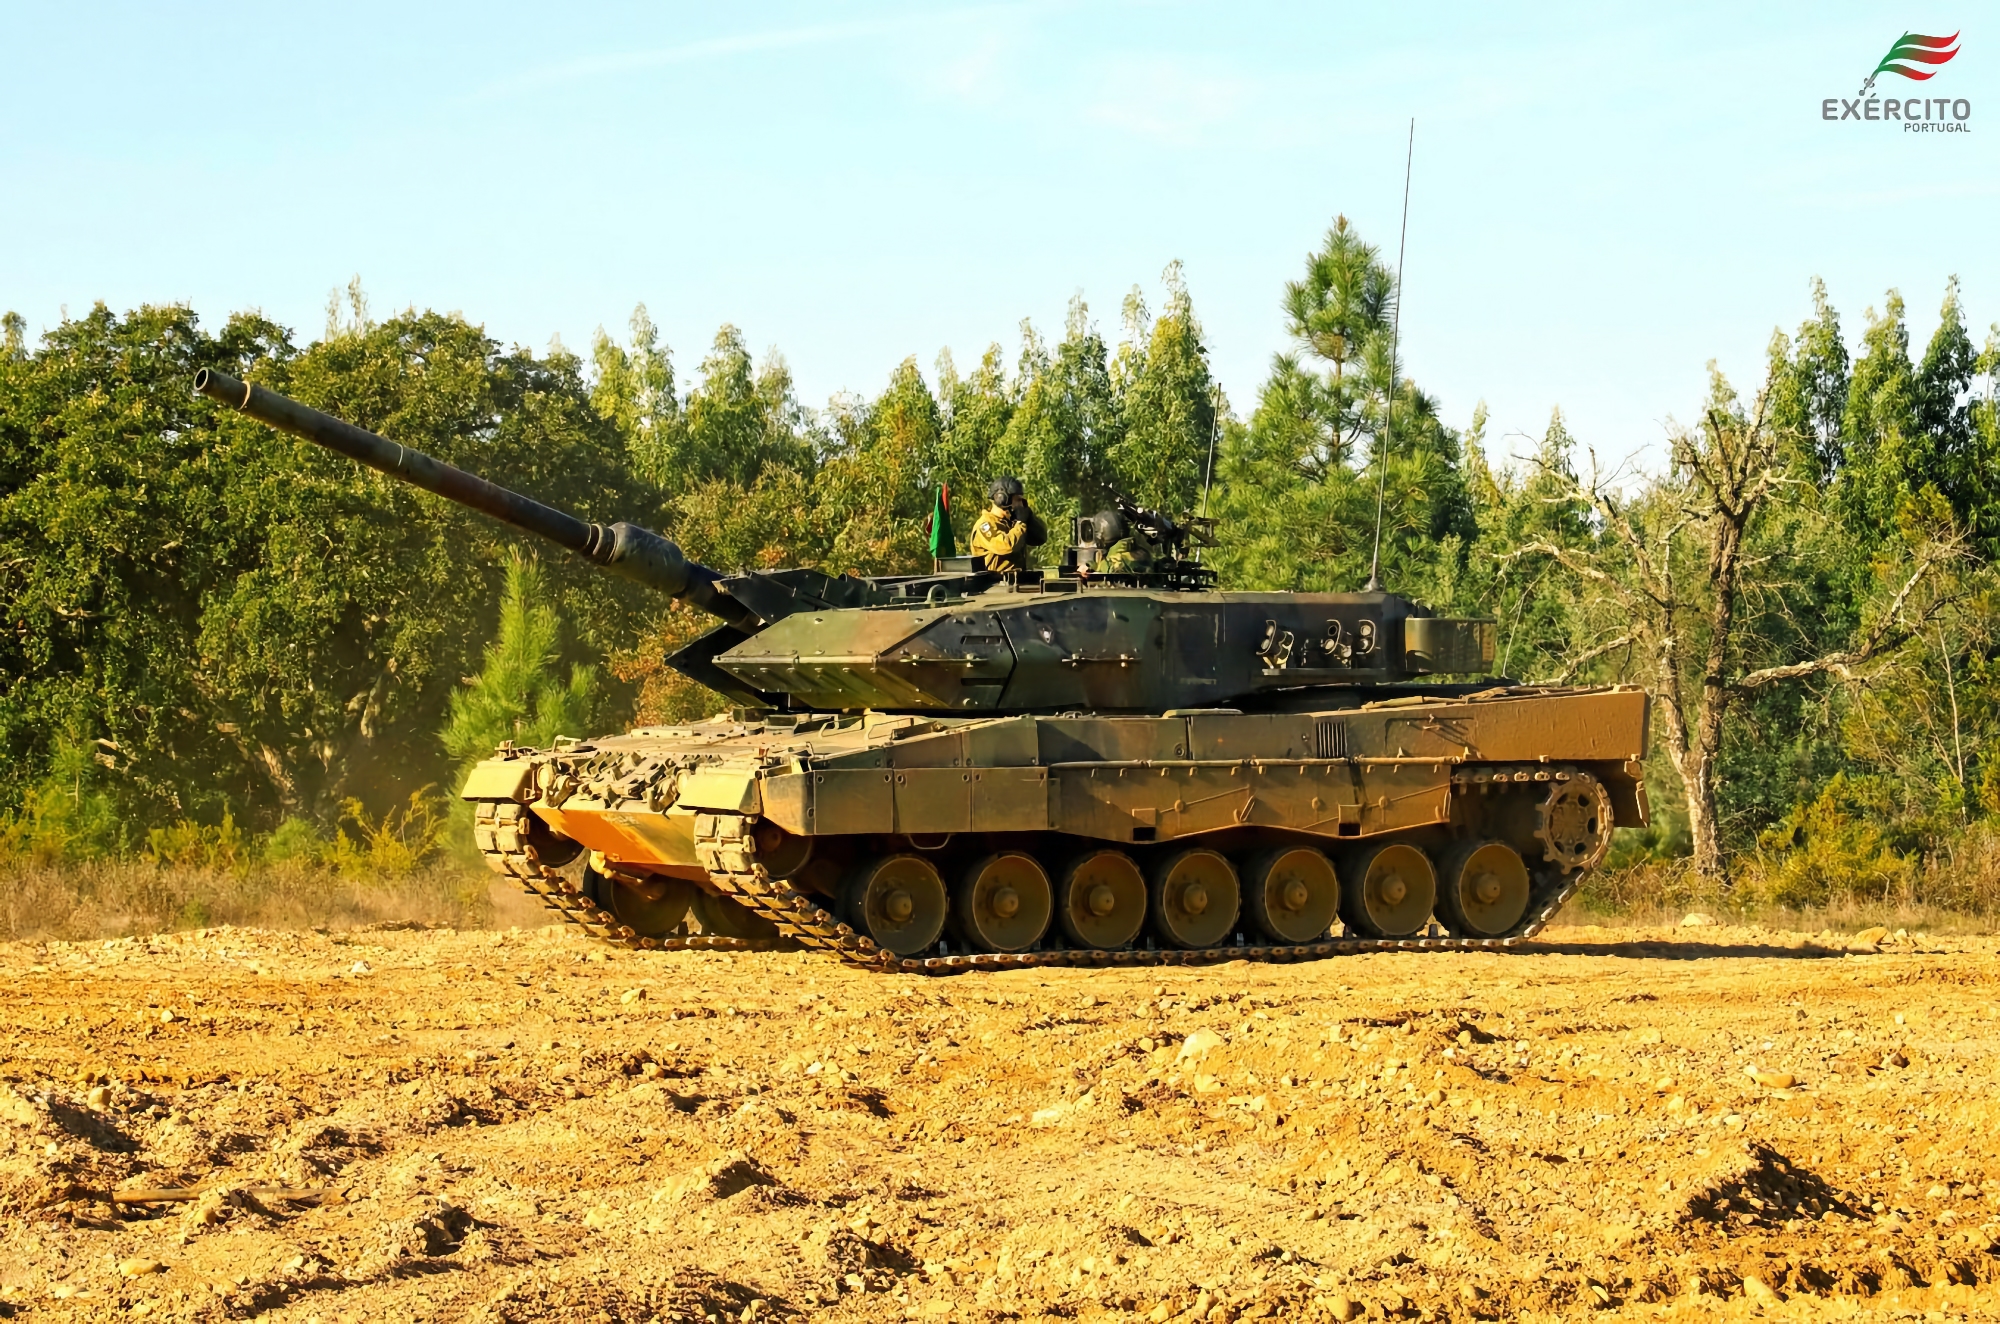 Following Poland and Germany: Portugal handed Ukraine Leopard 2 tanks, now AFU has 35 of them